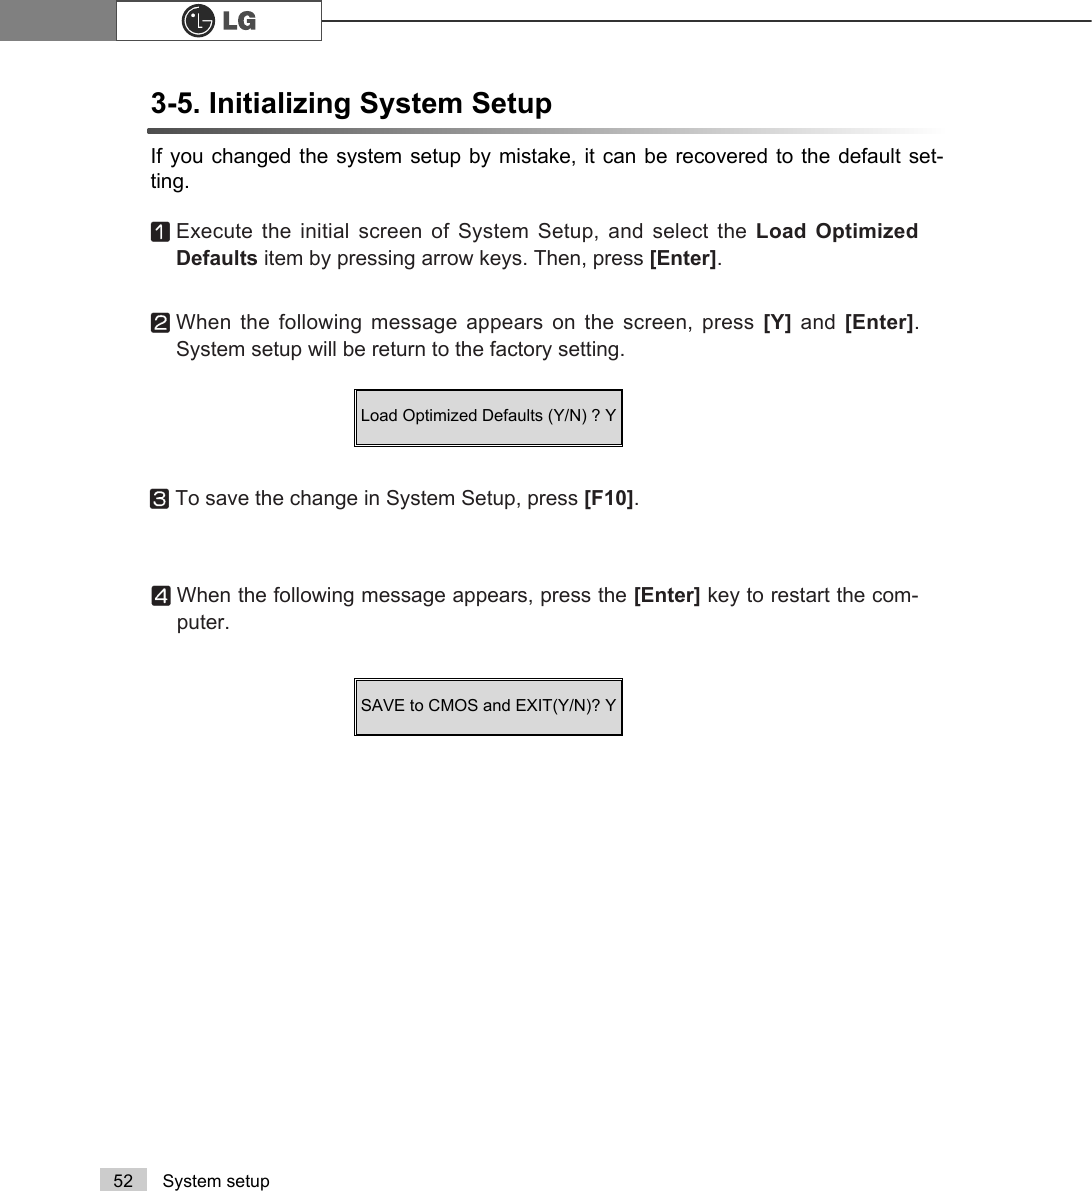 52 System setup3-5. Initializing System Setup If you changed the system setup by mistake, it can be recovered to the default set-ting.ⓞExecute the initial screen of System Setup, and select the Load OptimizedDefaults item by pressing arrow keys. Then, press [Enter].ⓟWhen the following message appears on the screen, press [Y]  and  [Enter].System setup will be return to the factory setting.ⓠTo save the change in System Setup, press [F10]. ⓡWhen the following message appears, press the [Enter] key to restart the com-puter.SAVE to CMOS and EXIT(Y/N)? Y Load Optimized Defaults (Y/N) ? Y